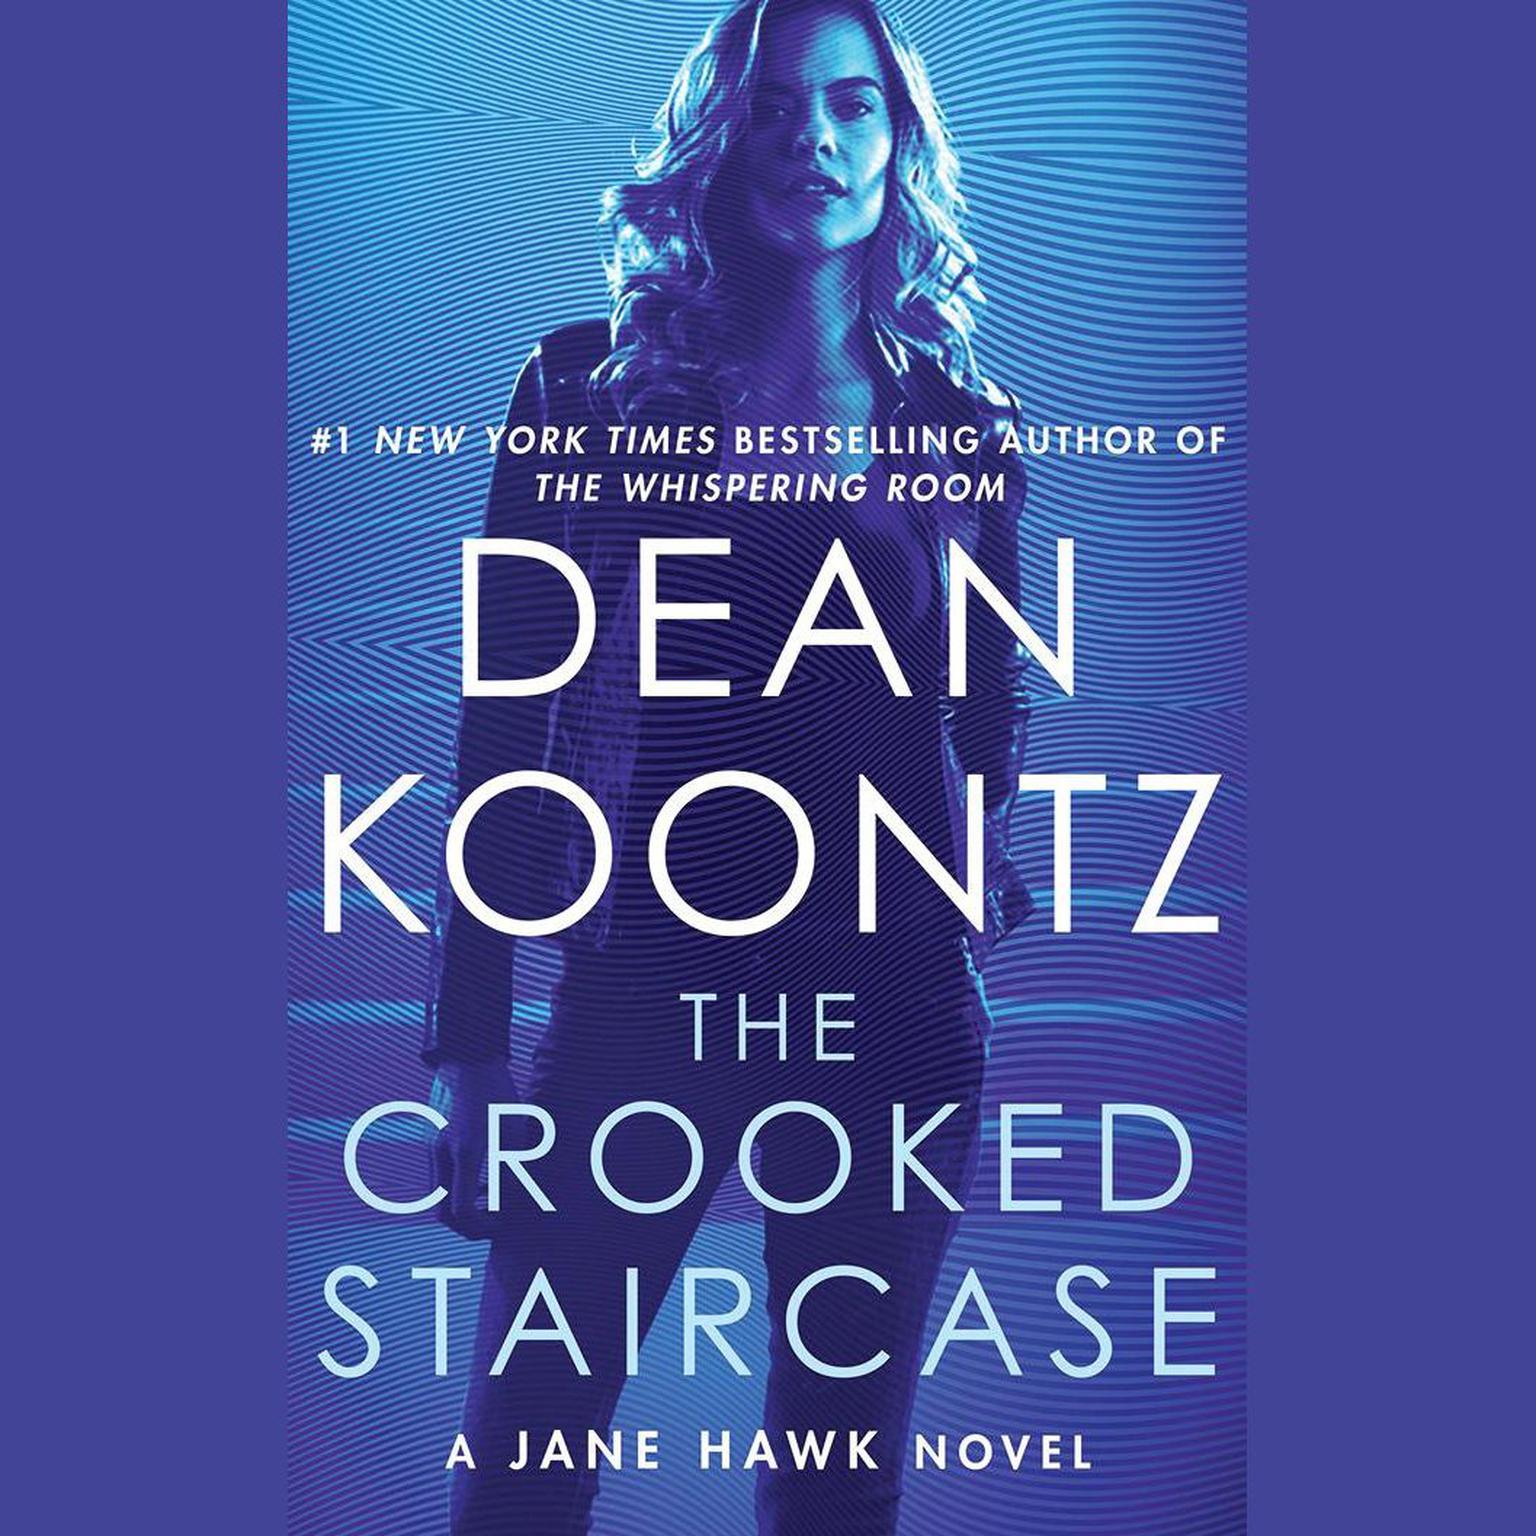 The Crooked Staircase: A Jane Hawk Novel Audiobook, by Dean Koontz